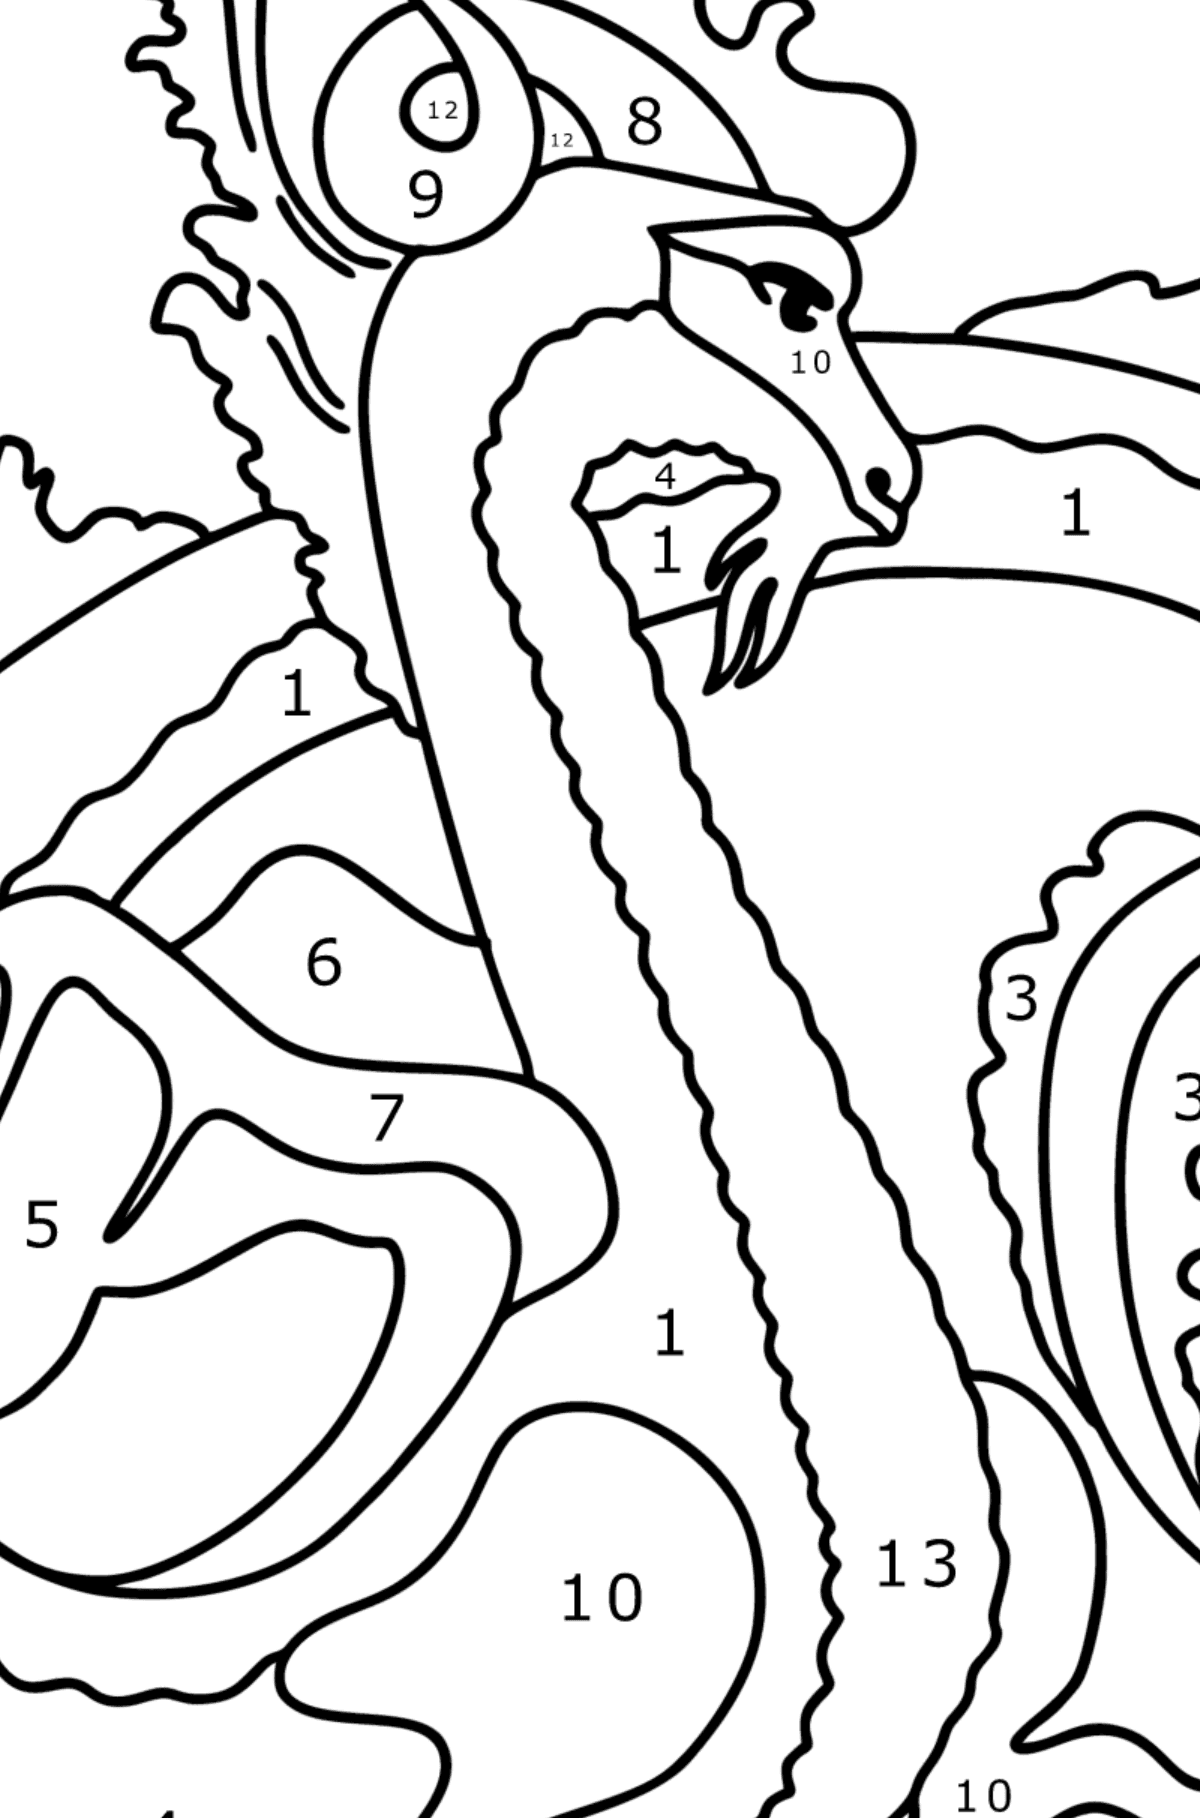 Mythical Dragon coloring page - Coloring by Numbers for Kids